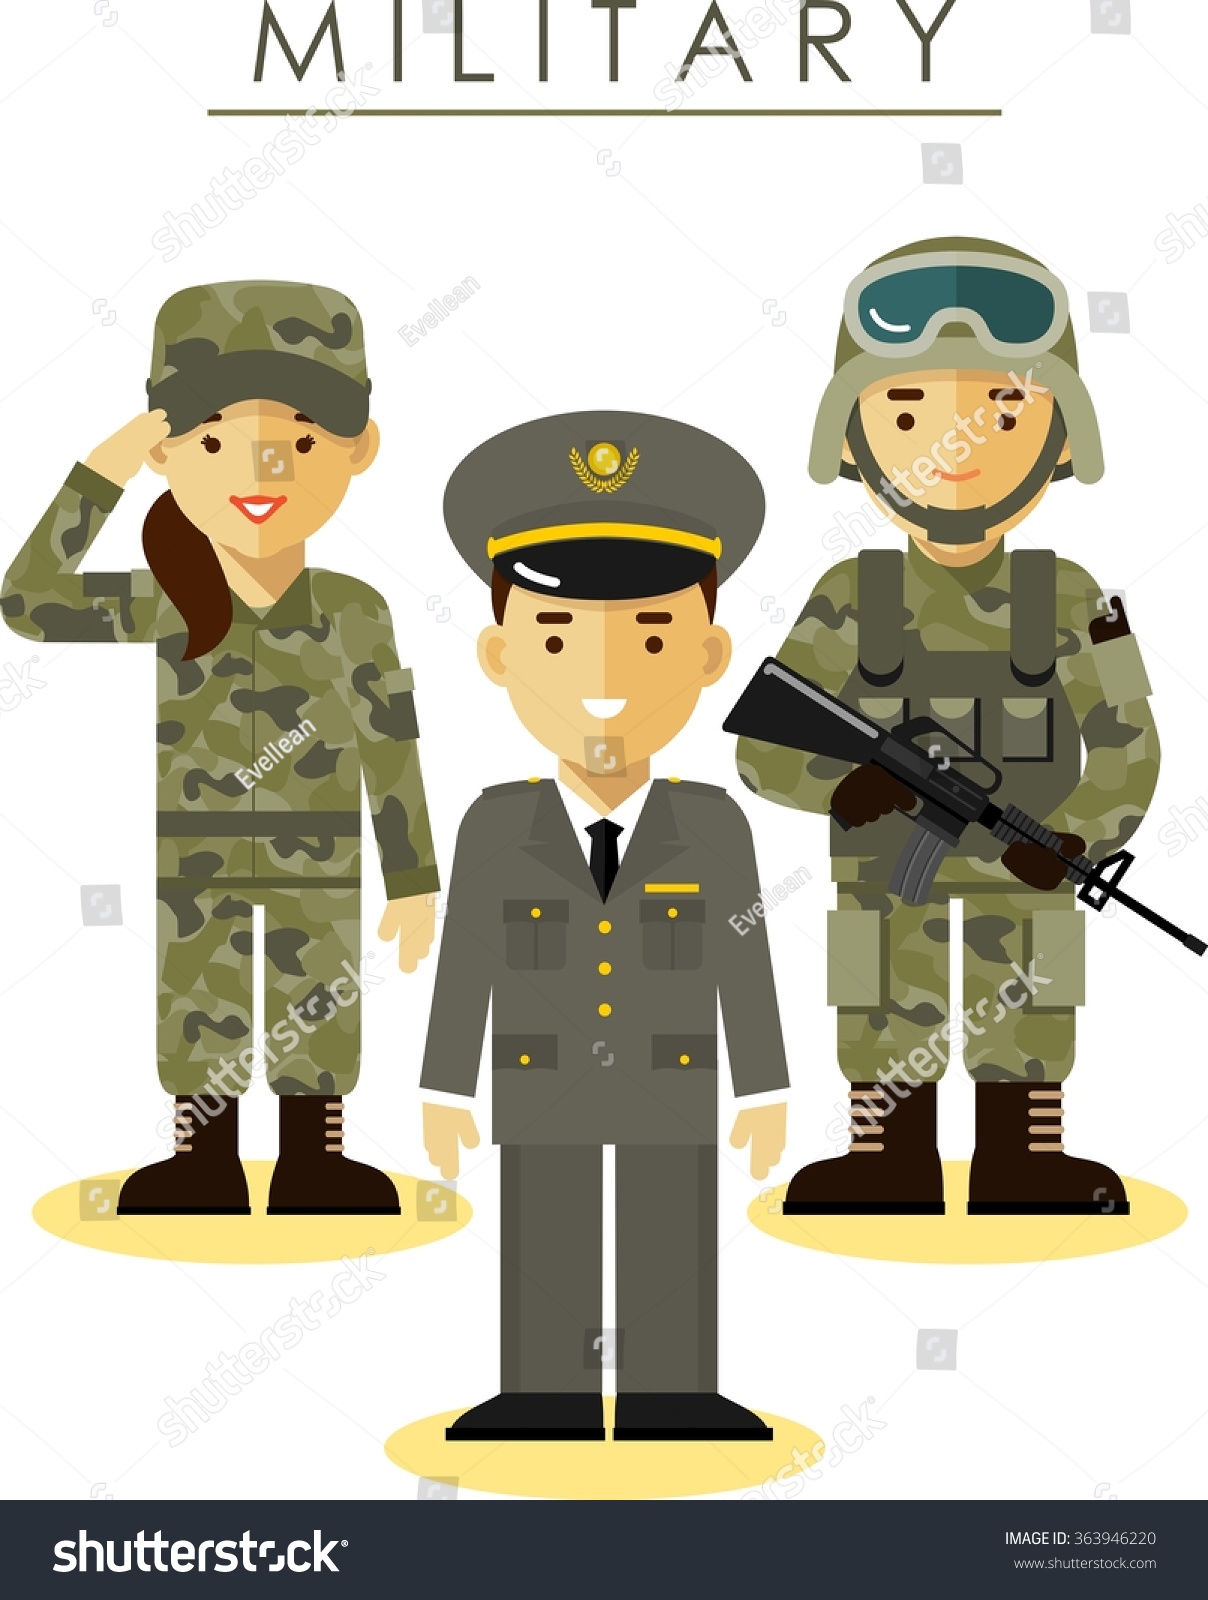 military officer clipart - photo #47